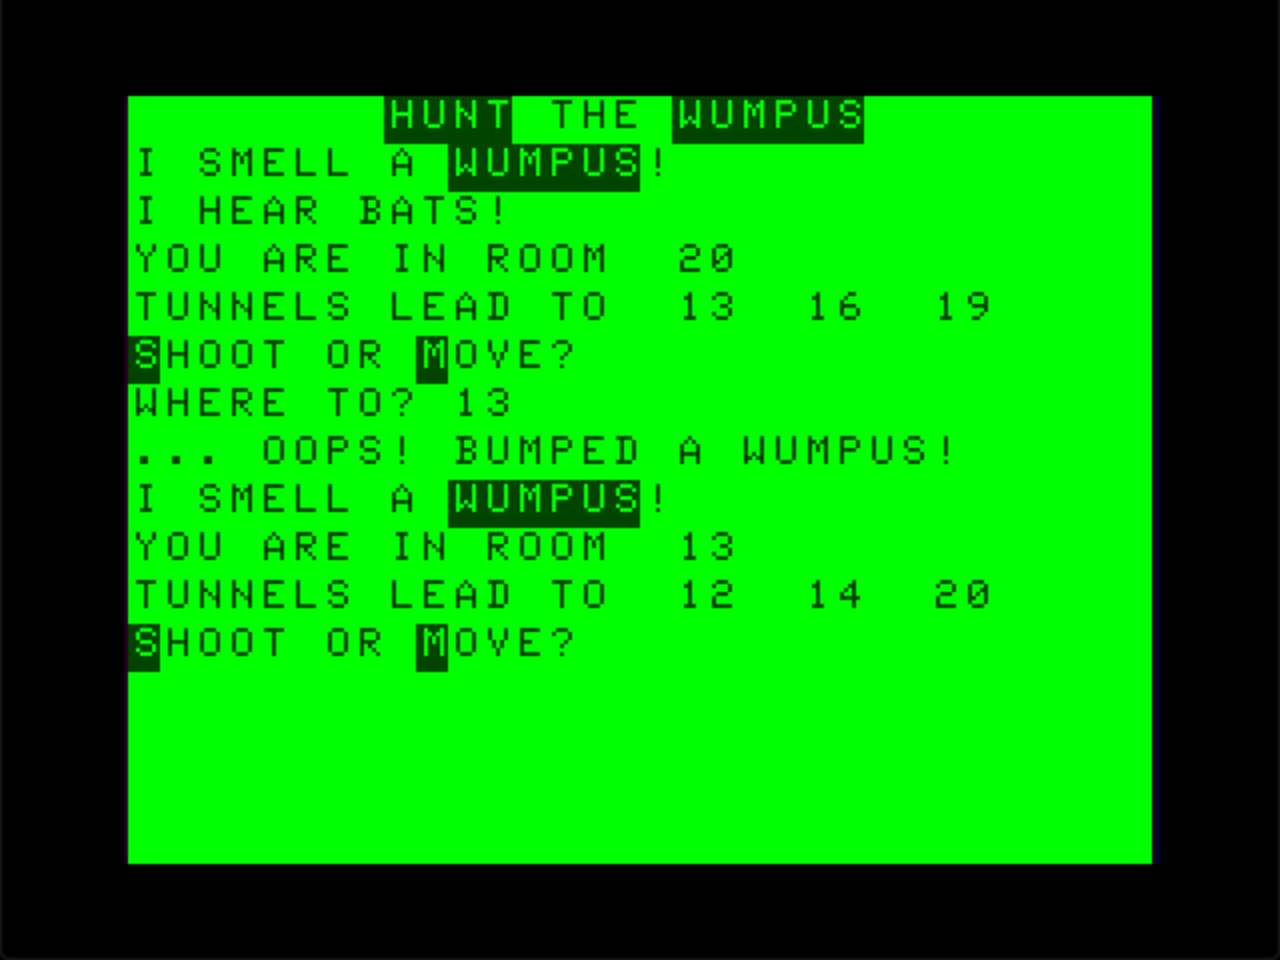 I smell a Wumpus: “I smell a Wumpus”, “Oops! Bumped a Wumpus!” from the Color Computer version of Hunt the Wumpus.; Color Computer; CoCo, TRS-80 Color Computer; computer history